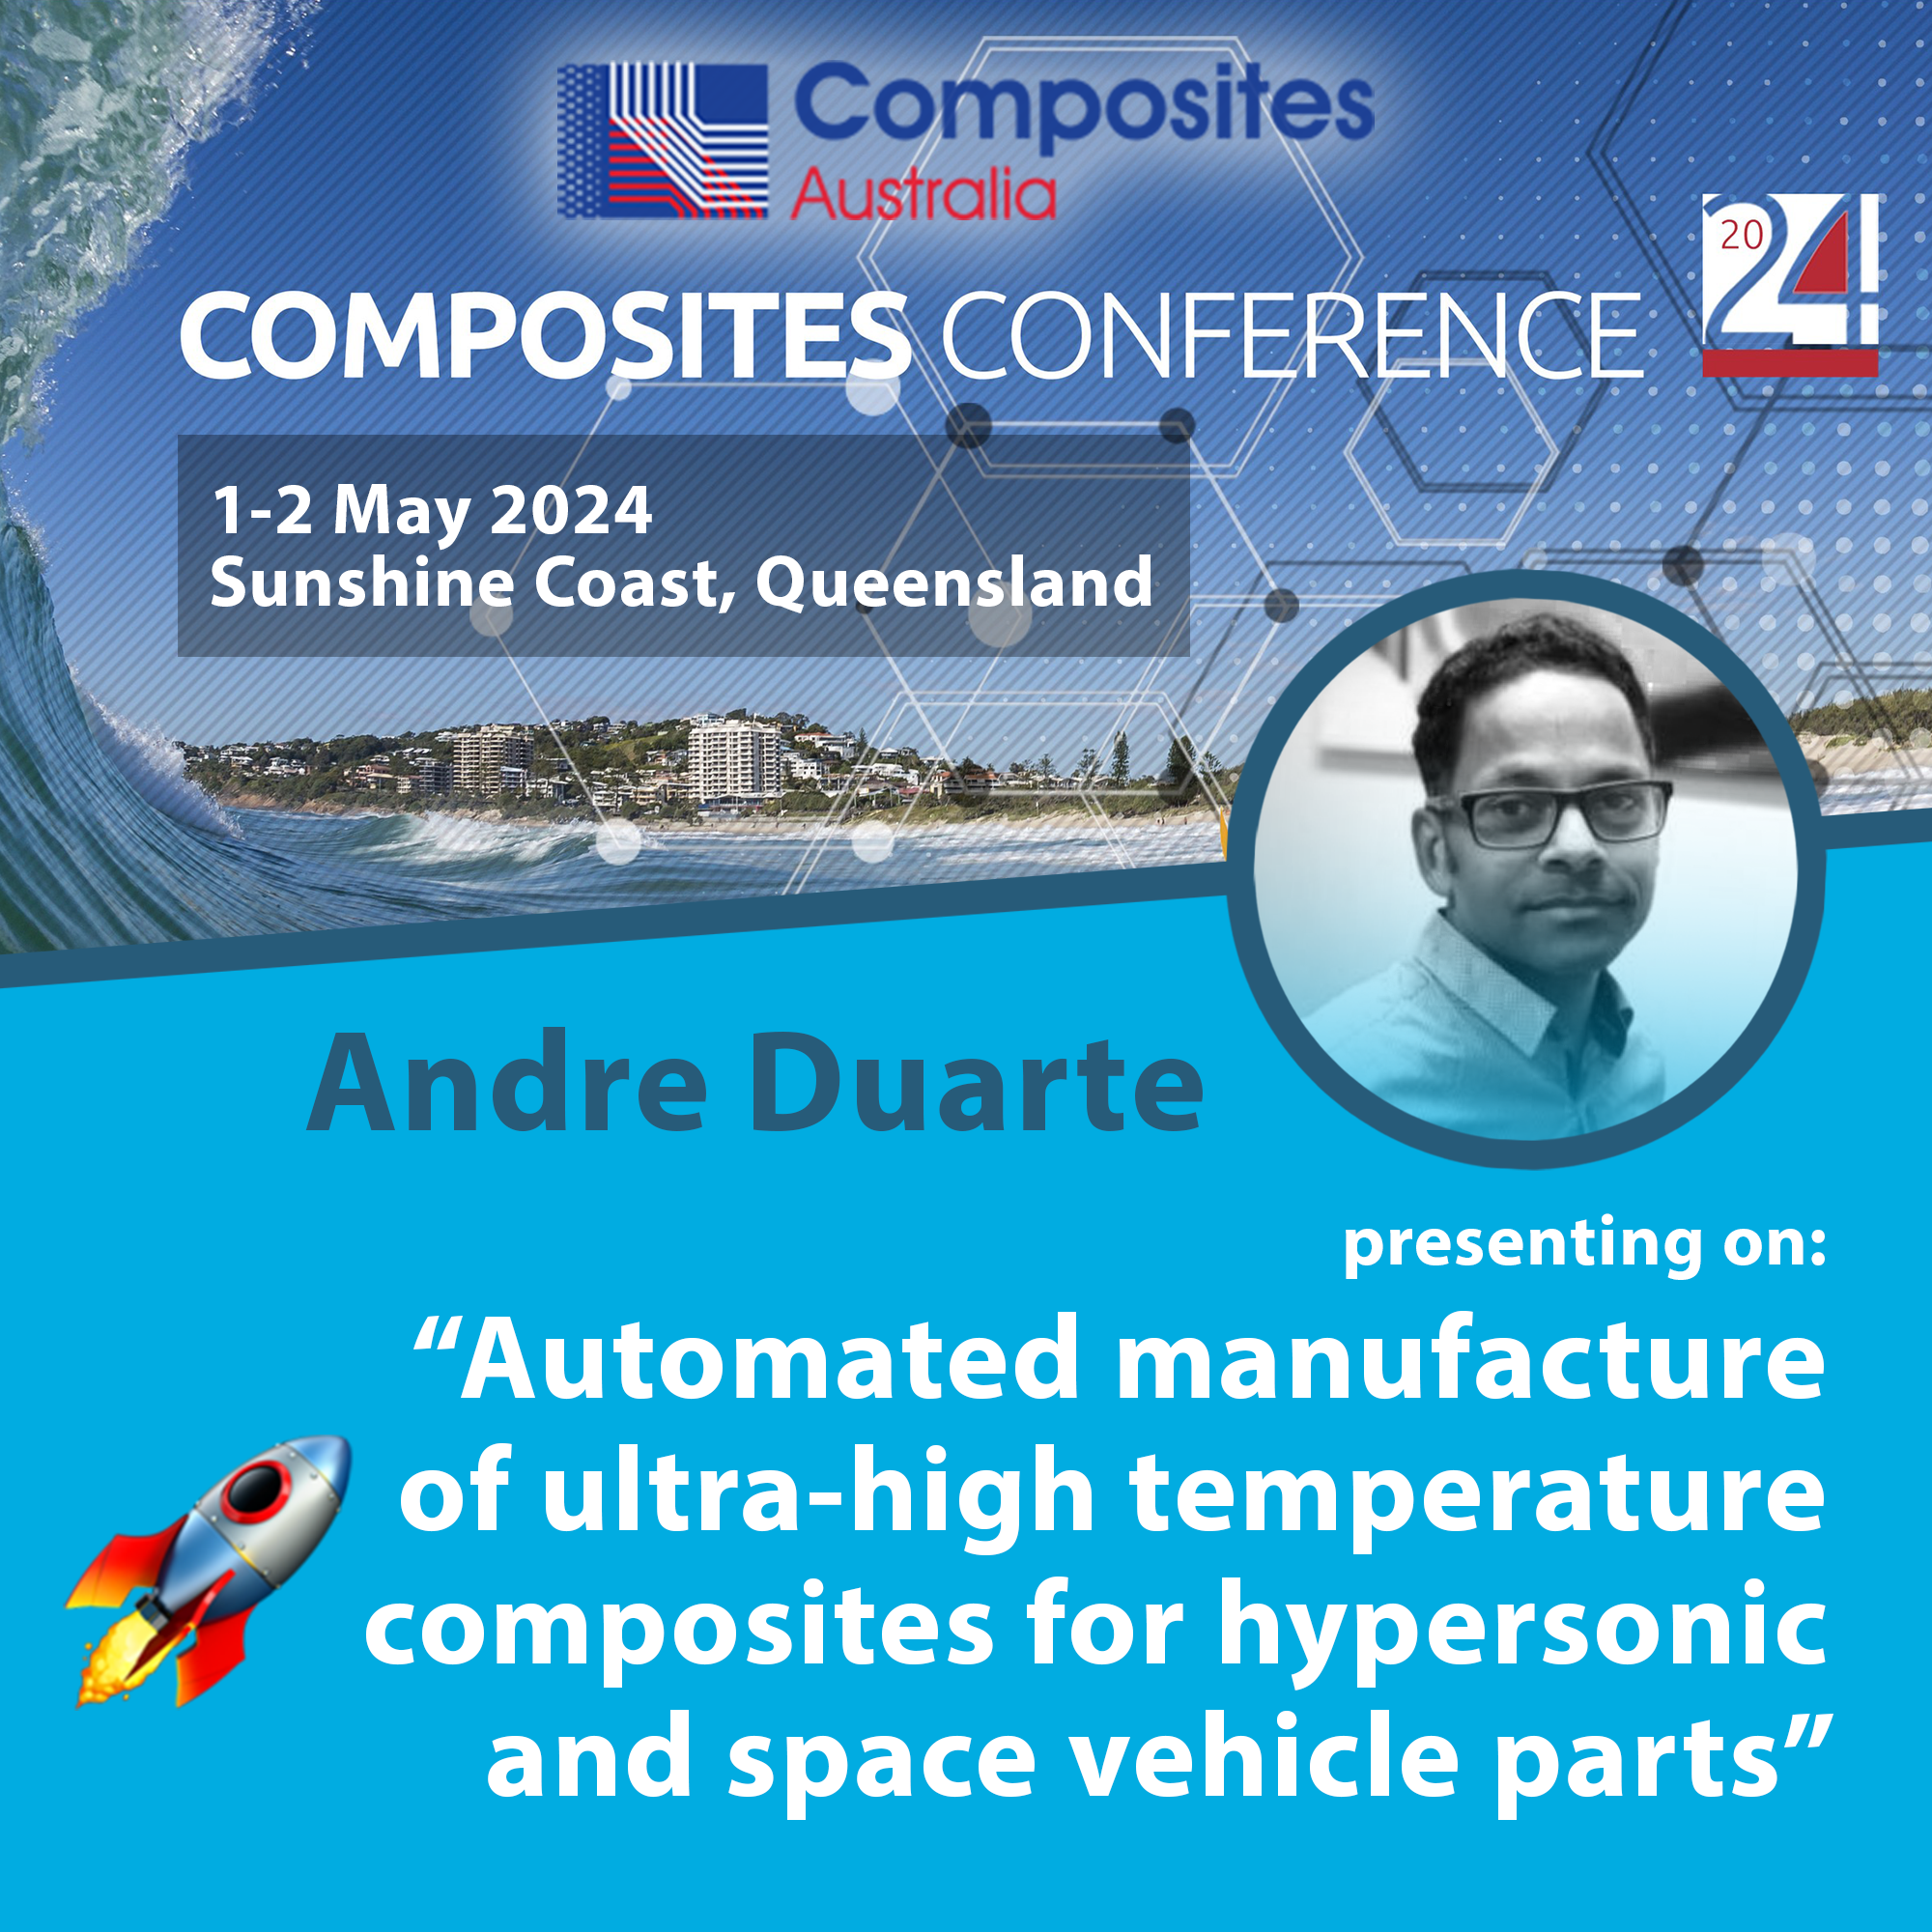 Andre Duarte presenting at Composites Australia Annual Conference 1-2 May 2024 in Sunshine Coast, Queensland